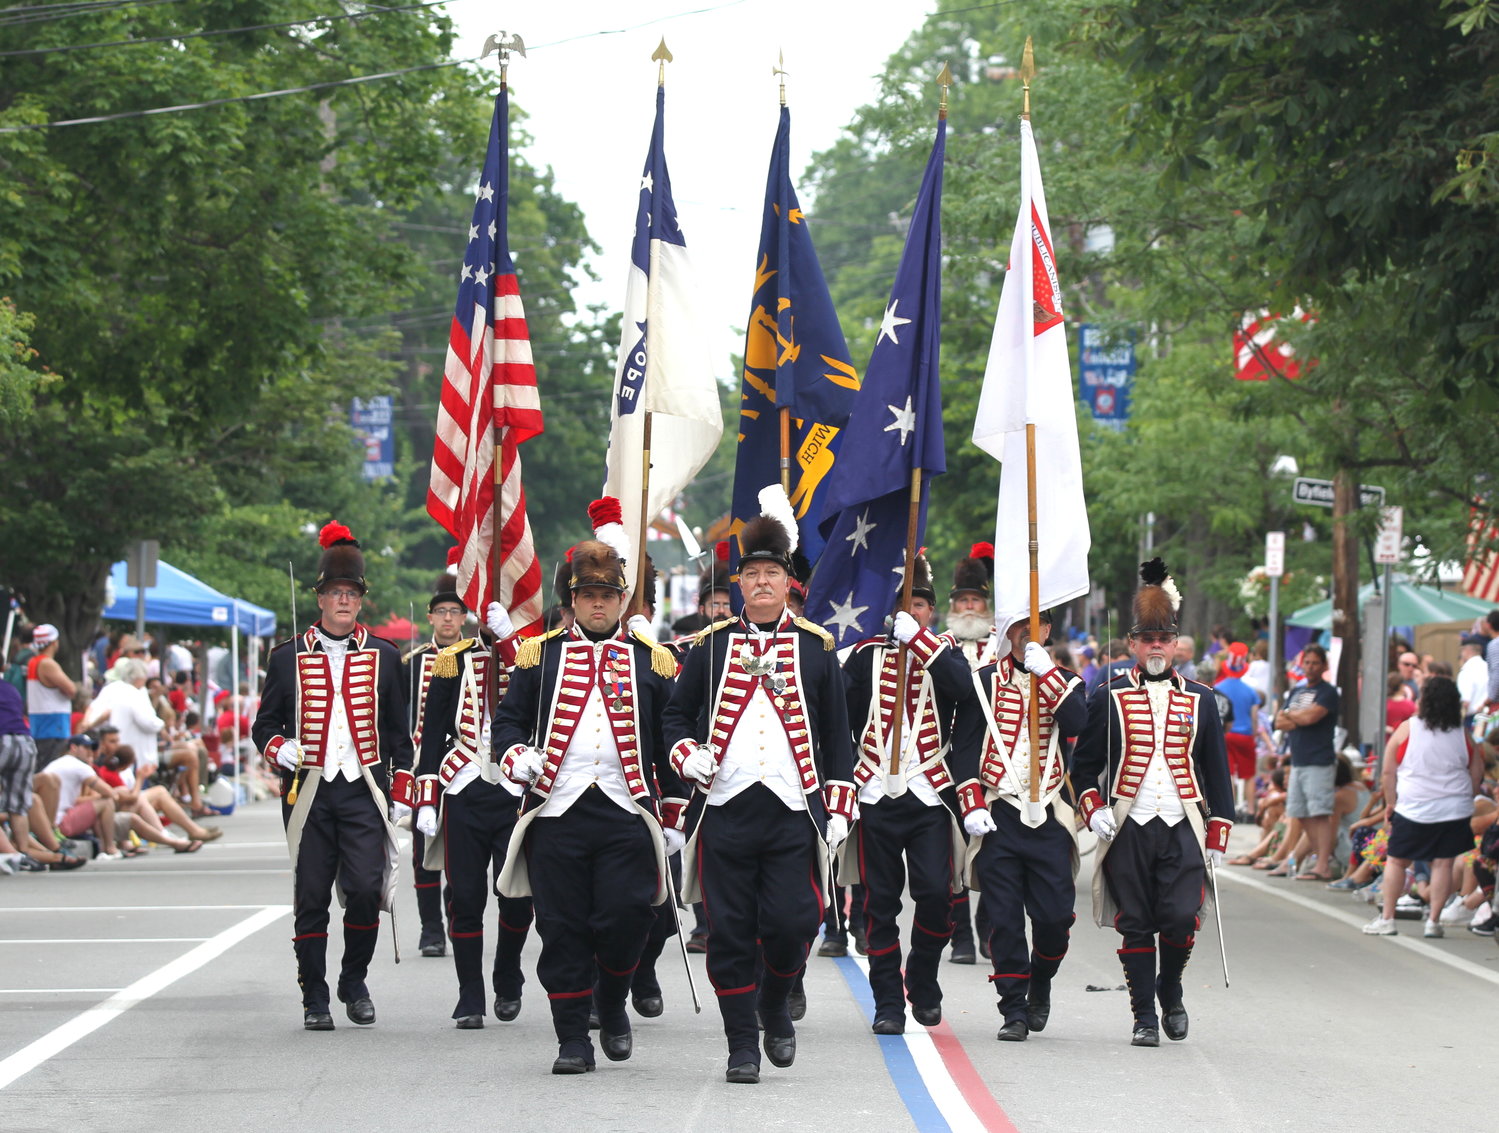 Don't miss Bristol's famous Fourth of July parade and celebration!